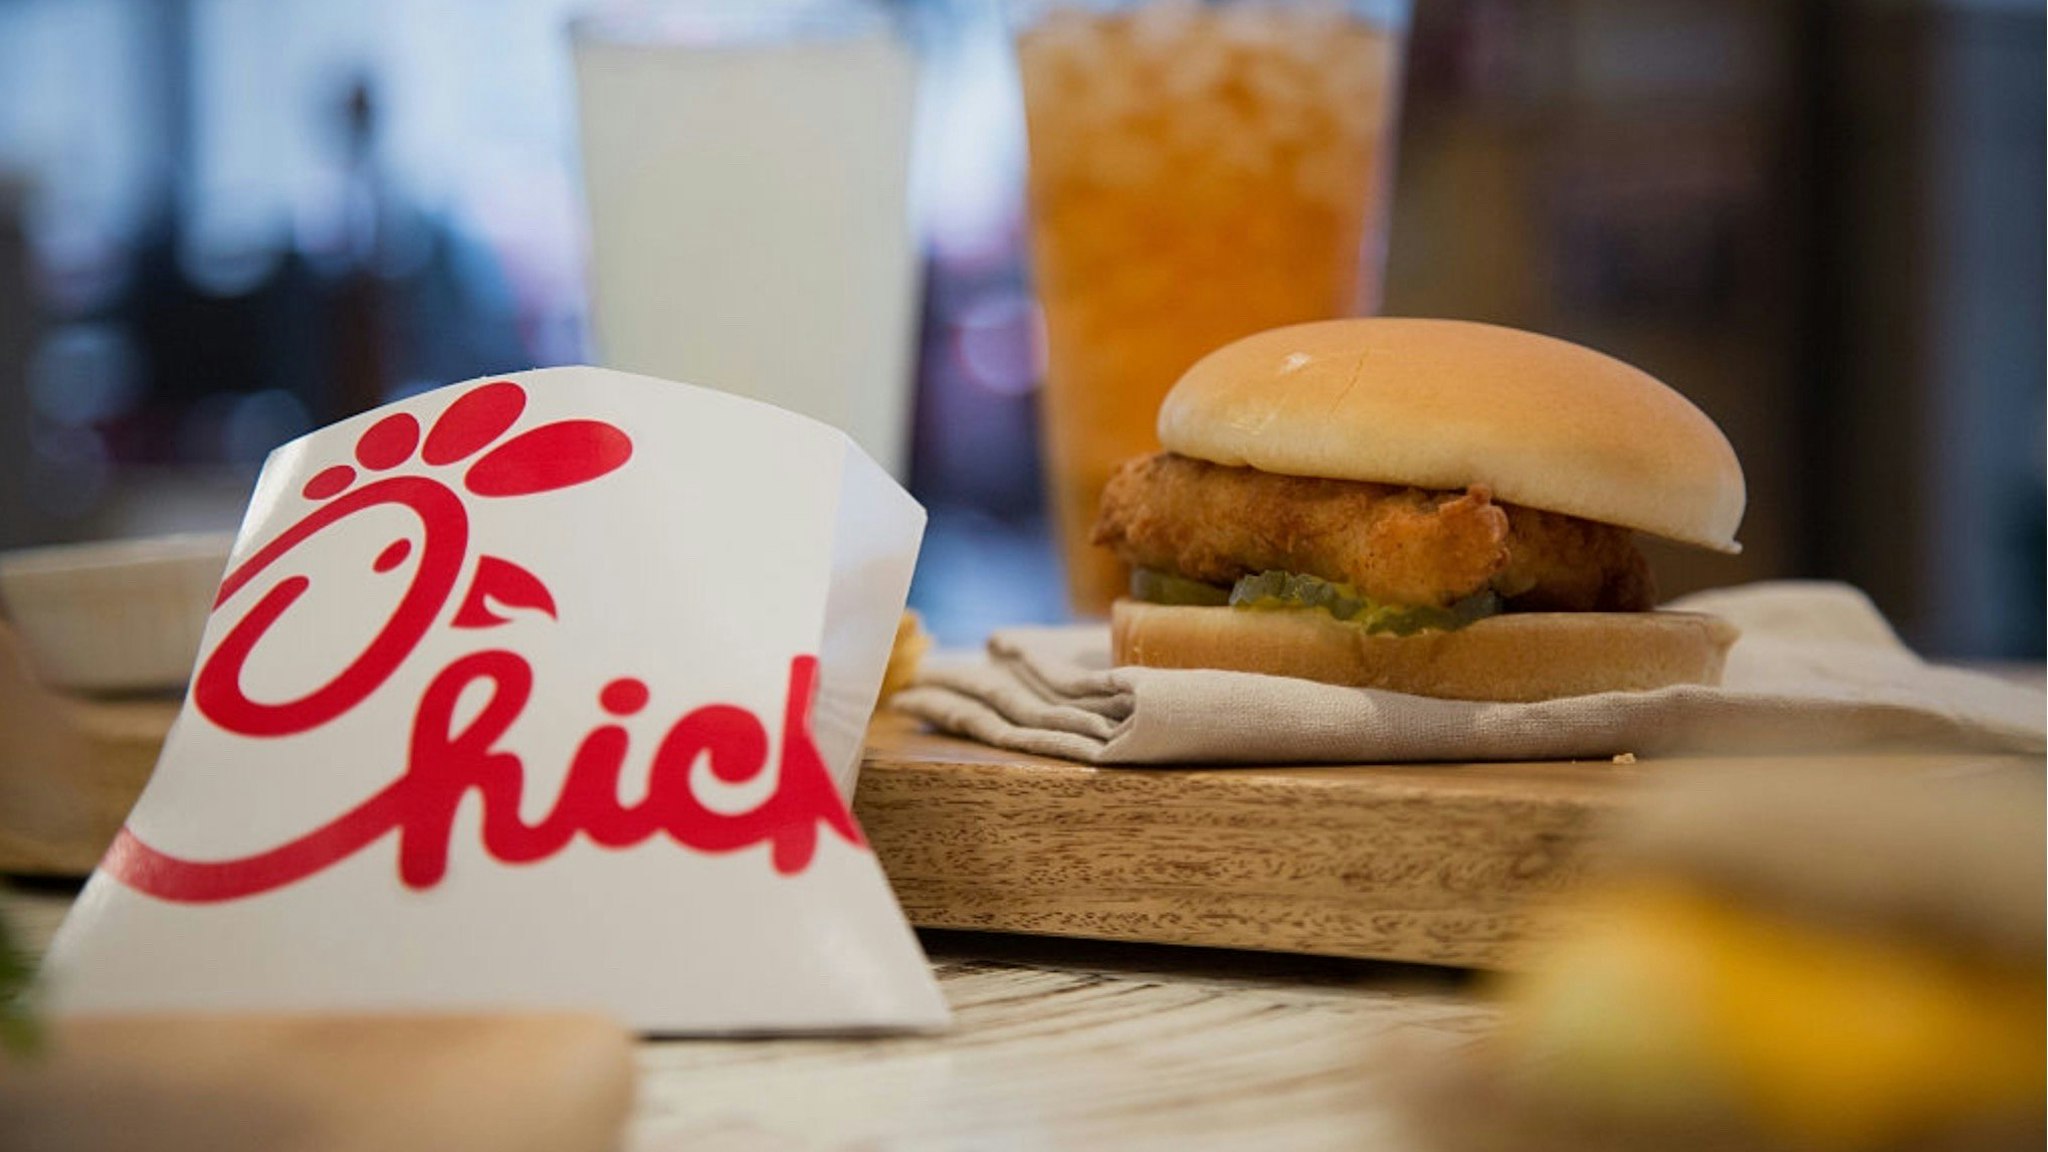 French fries and a fried chicken sandwich are arranged for a photograph during an event ahead of the grand opening for a Chick-fil-A restaurant in New York, U.S., on Friday, Oct. 2, 2015.